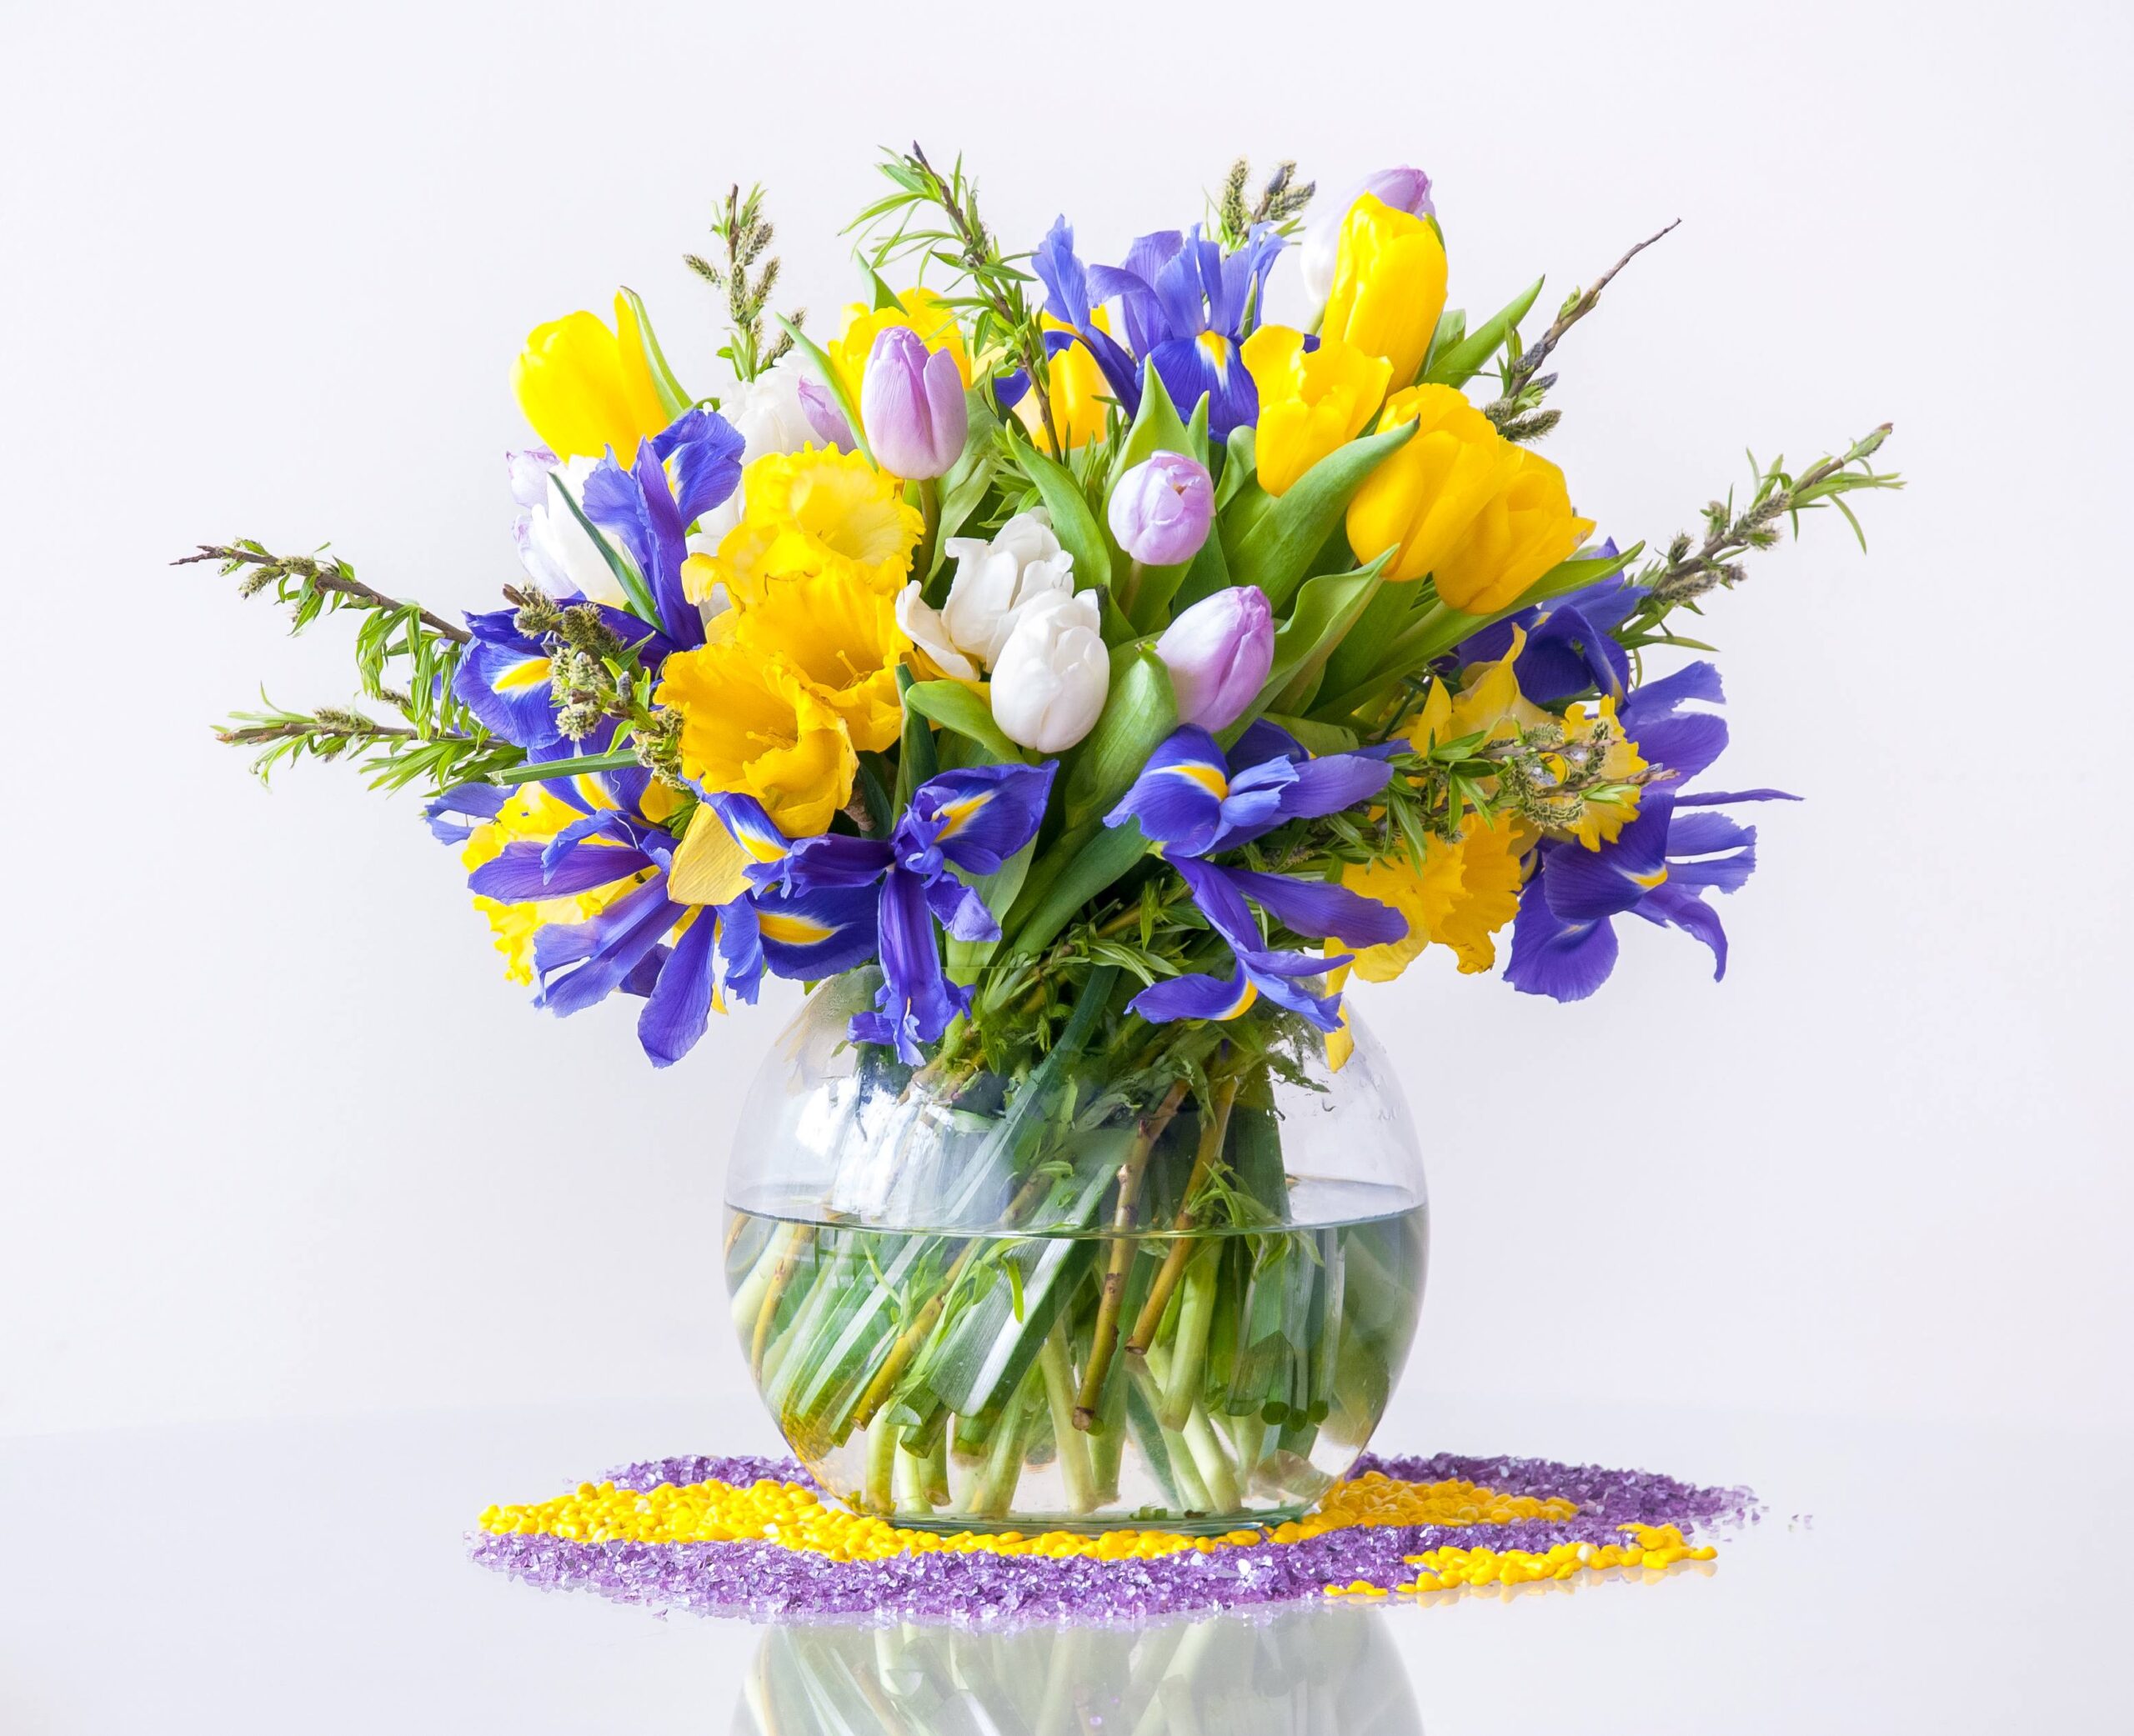 A typical Easter or springtime flower arrangement sitting in a clear, round, squat, bowl, half-filled with water. There is a purple and yellow placemat under the bowl. The cut flowers included in the arrangement are tulips, daffodils, and fleur-de-lises photographed on a white background.